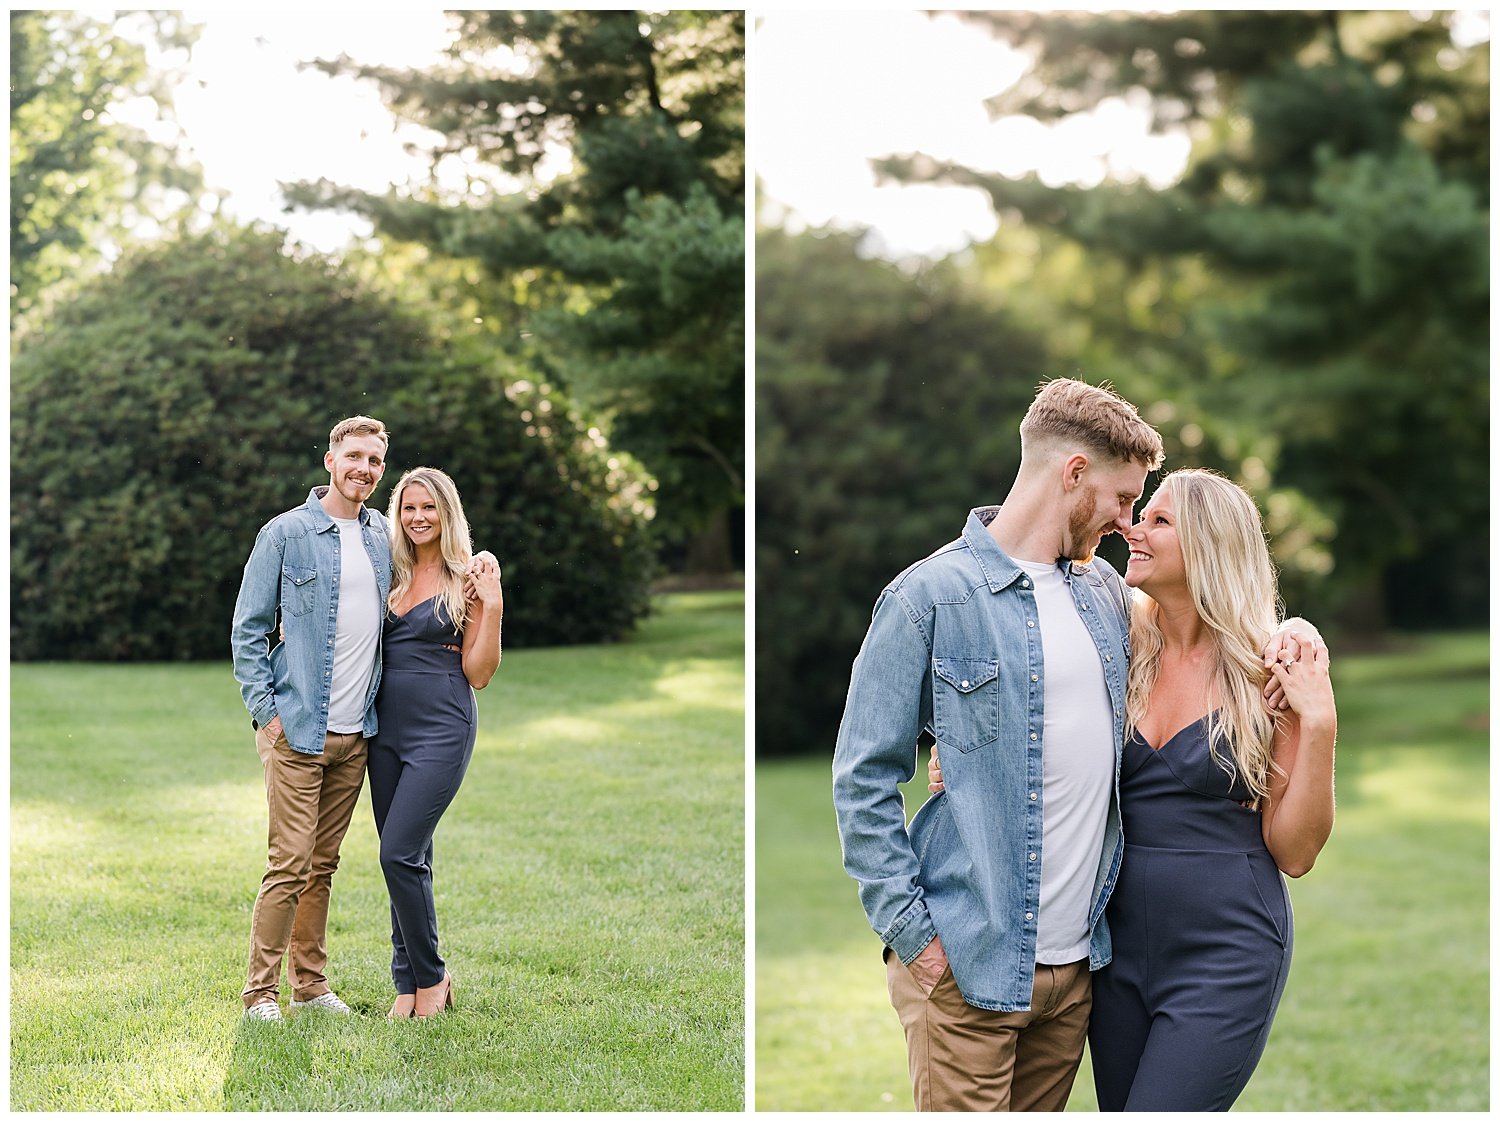 Kennett-Square-PA-engagement-session-with-a-puppy-Longwood-Gardens12.jpg